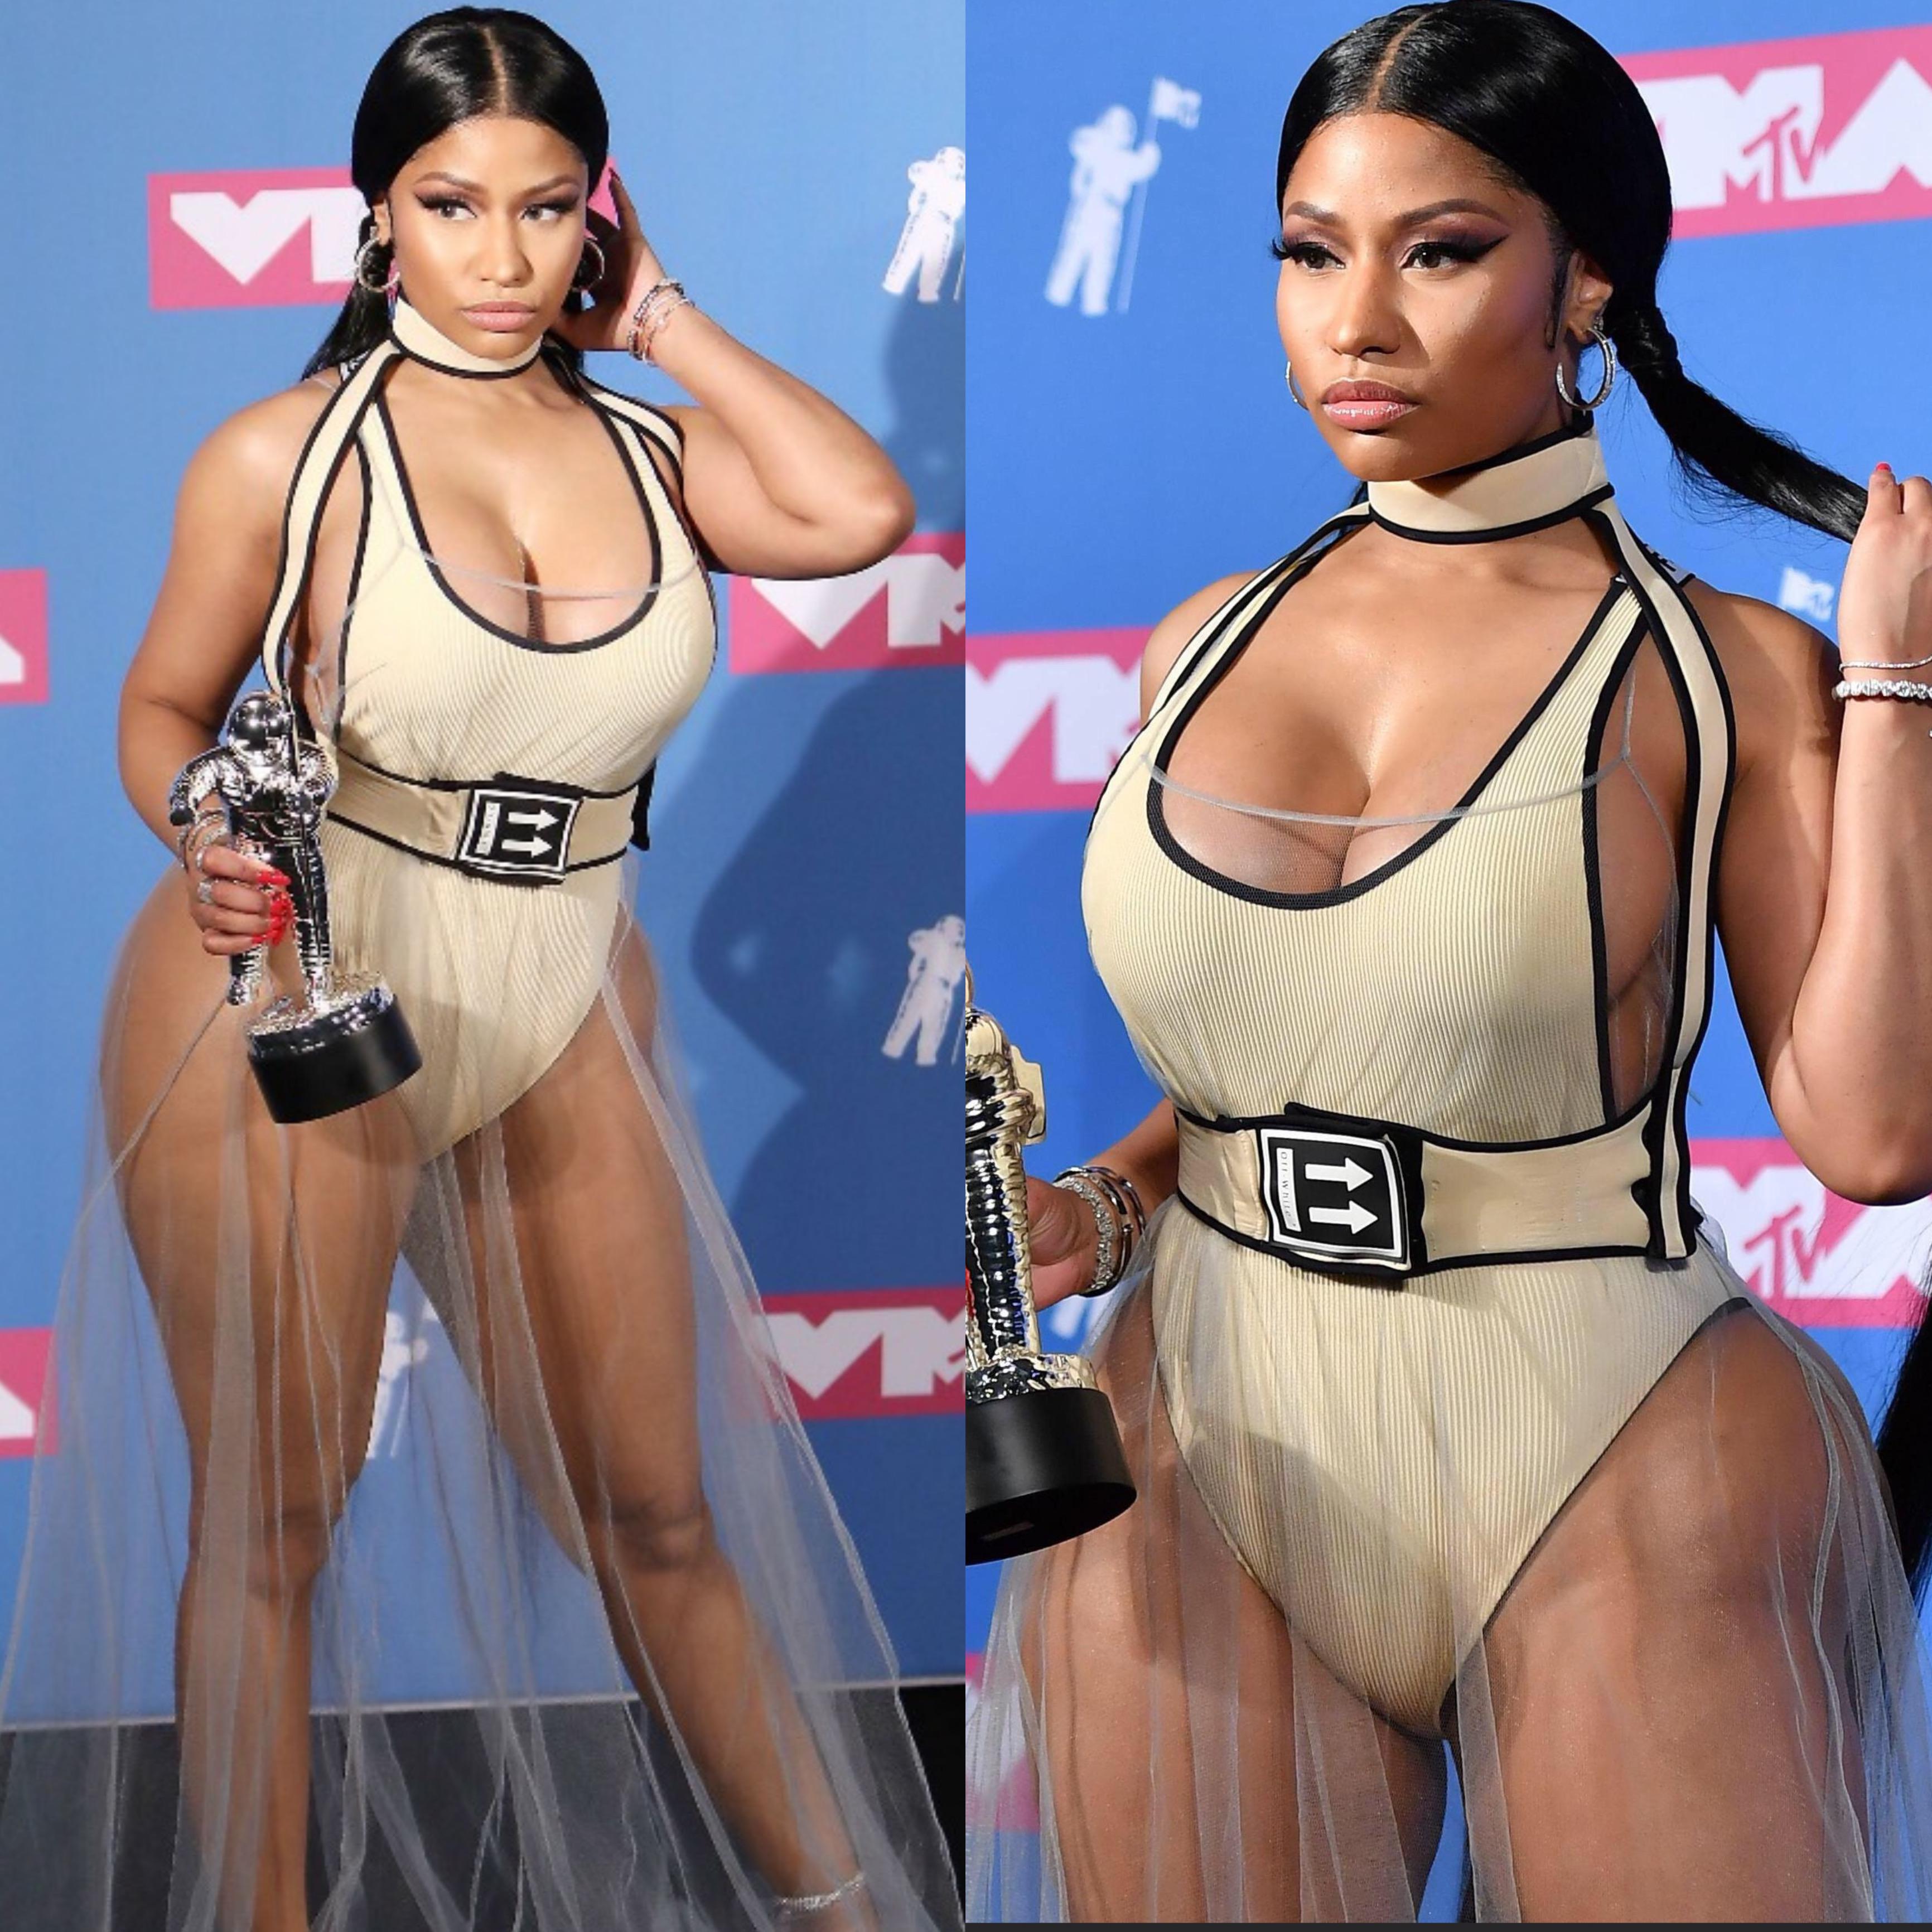 Looking For Buds To Milk My Cock For Nicki Minaj Or Other Busty Celeb